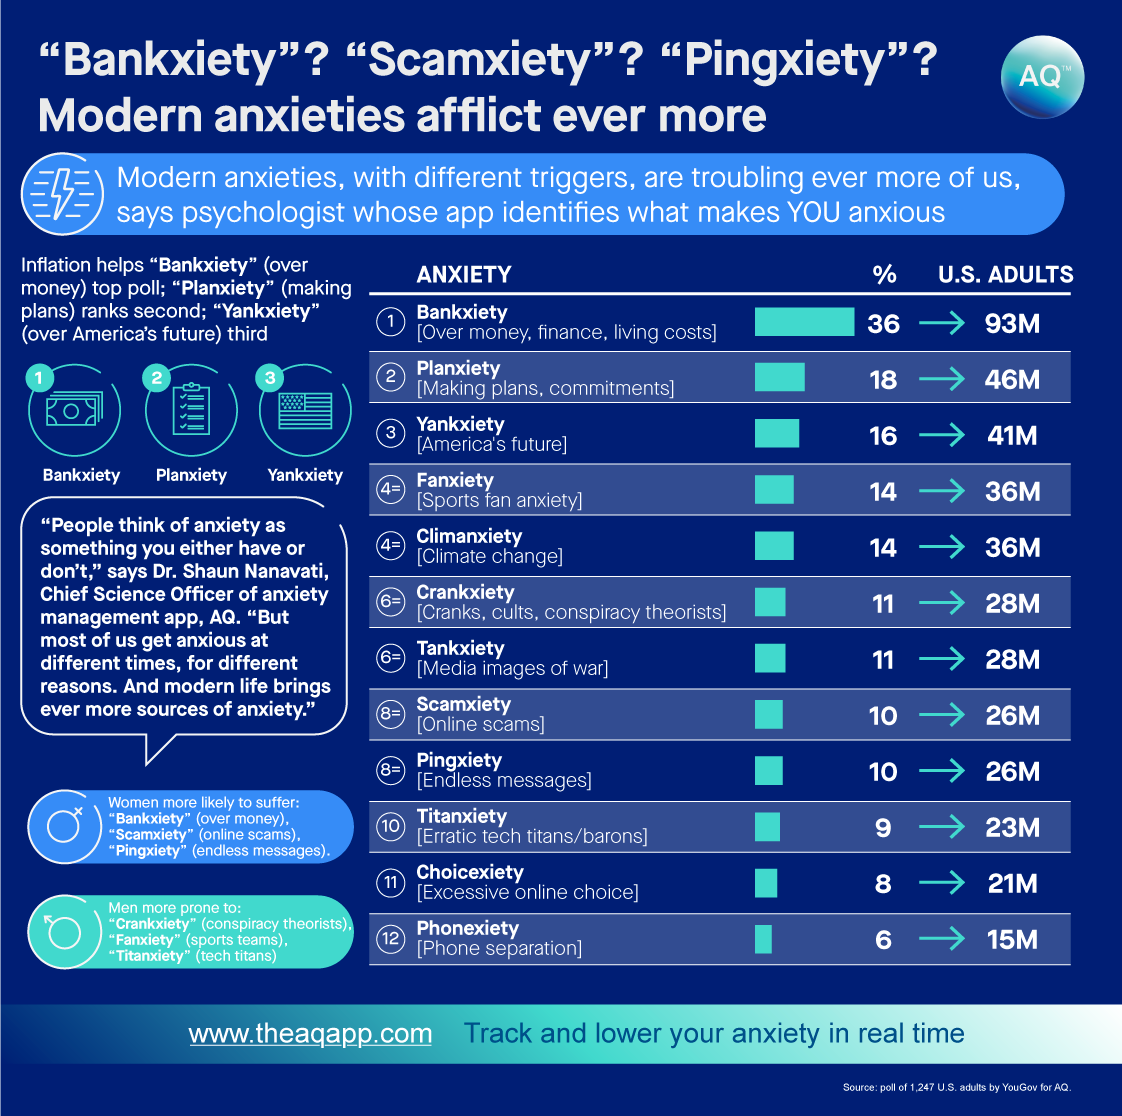 “Bankxiety”? “Scamxiety”? “Pingxiety”? Modern life is triggering ever more kinds of anxiety